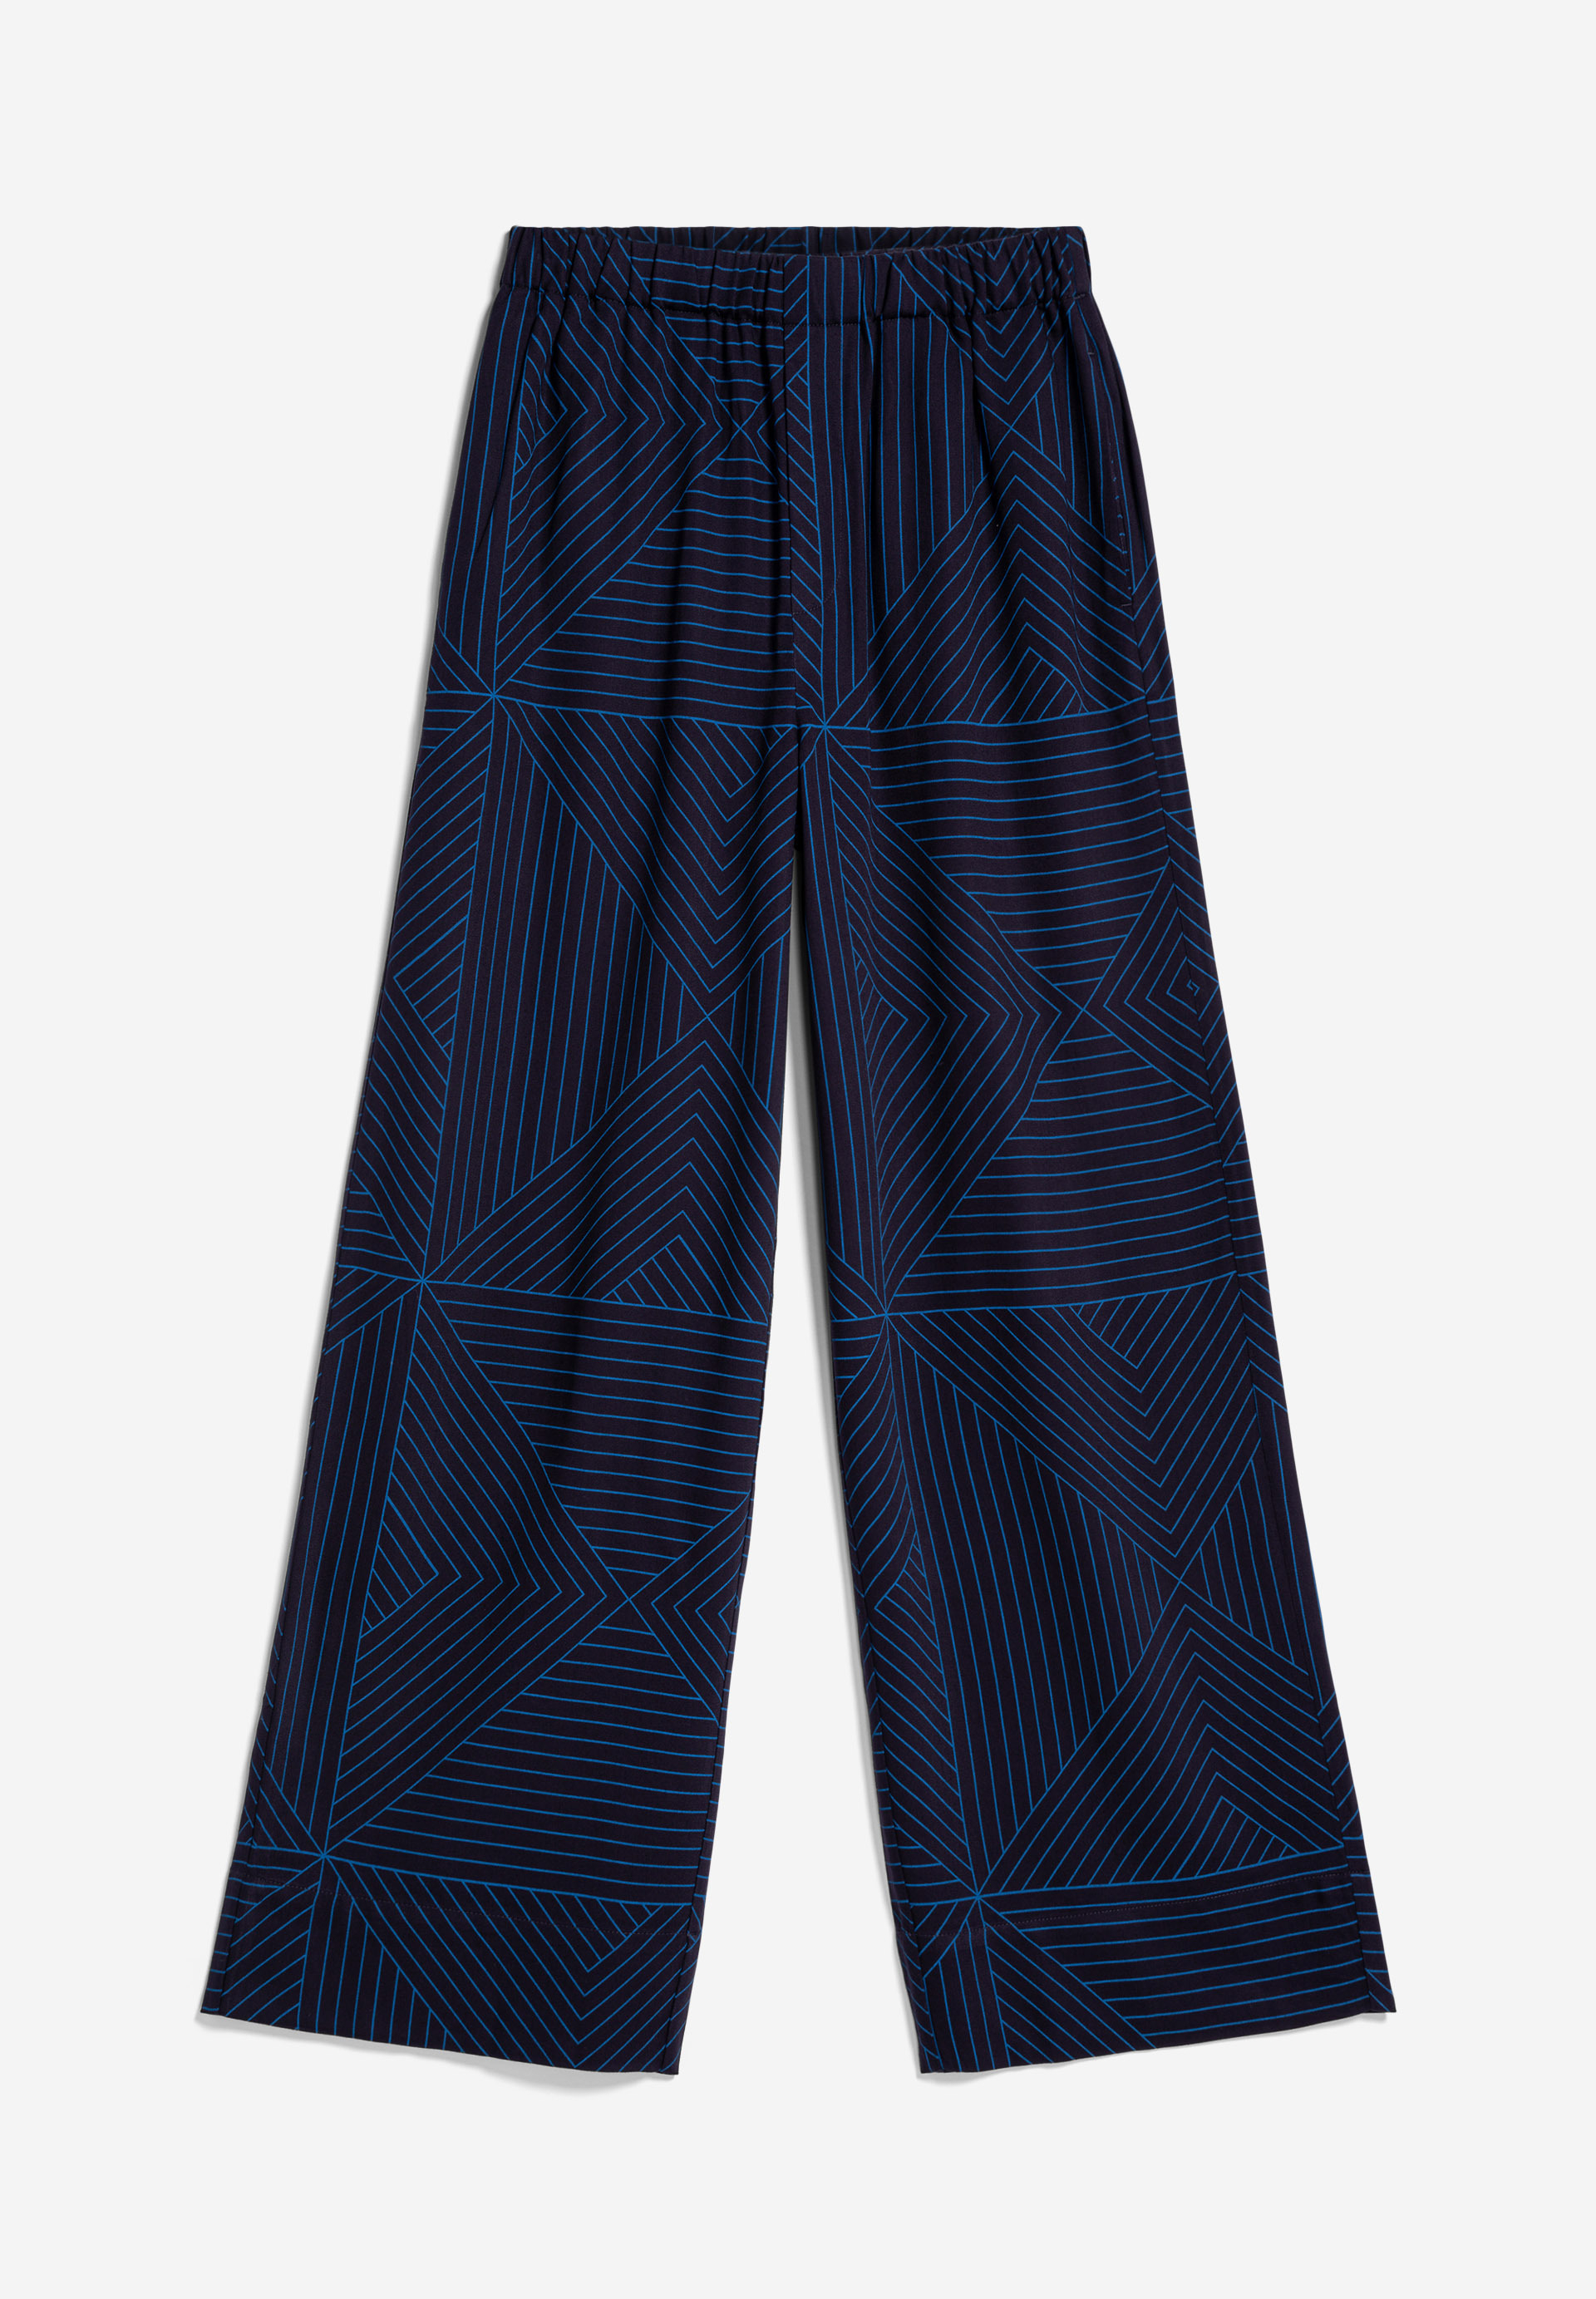 JOVAALIE GRAPHIC LINES Woven Pants made of LENZING™ ECOVERO™ Viscose